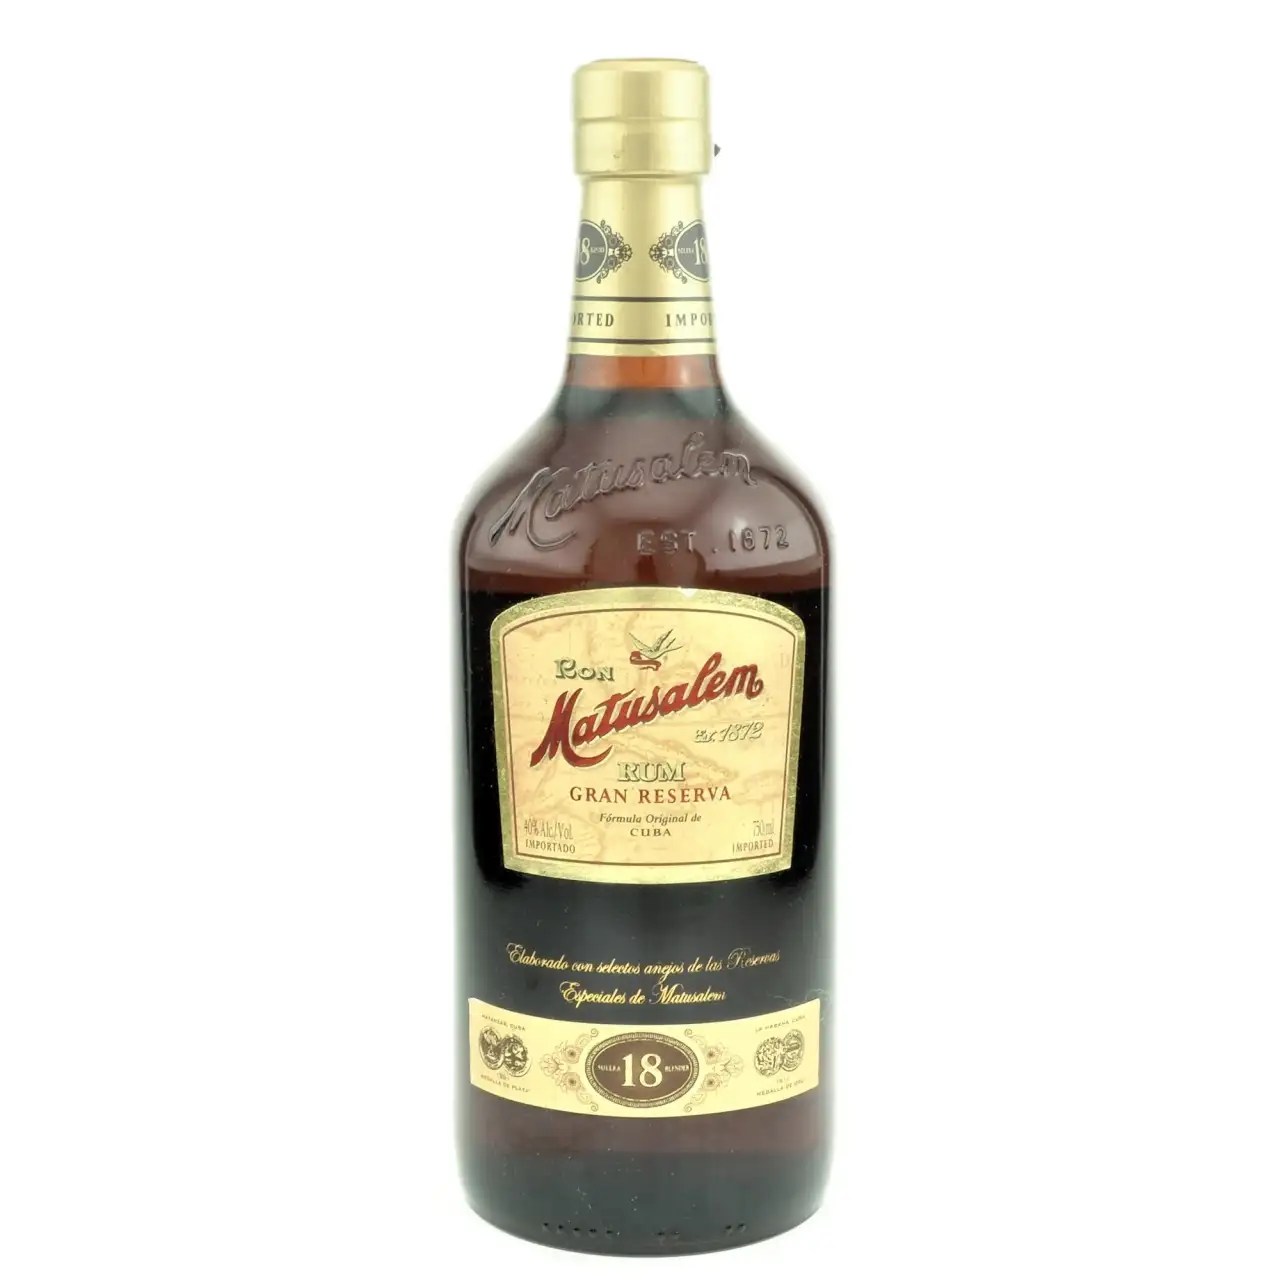 Image of the front of the bottle of the rum Gran Reserva 18 Años